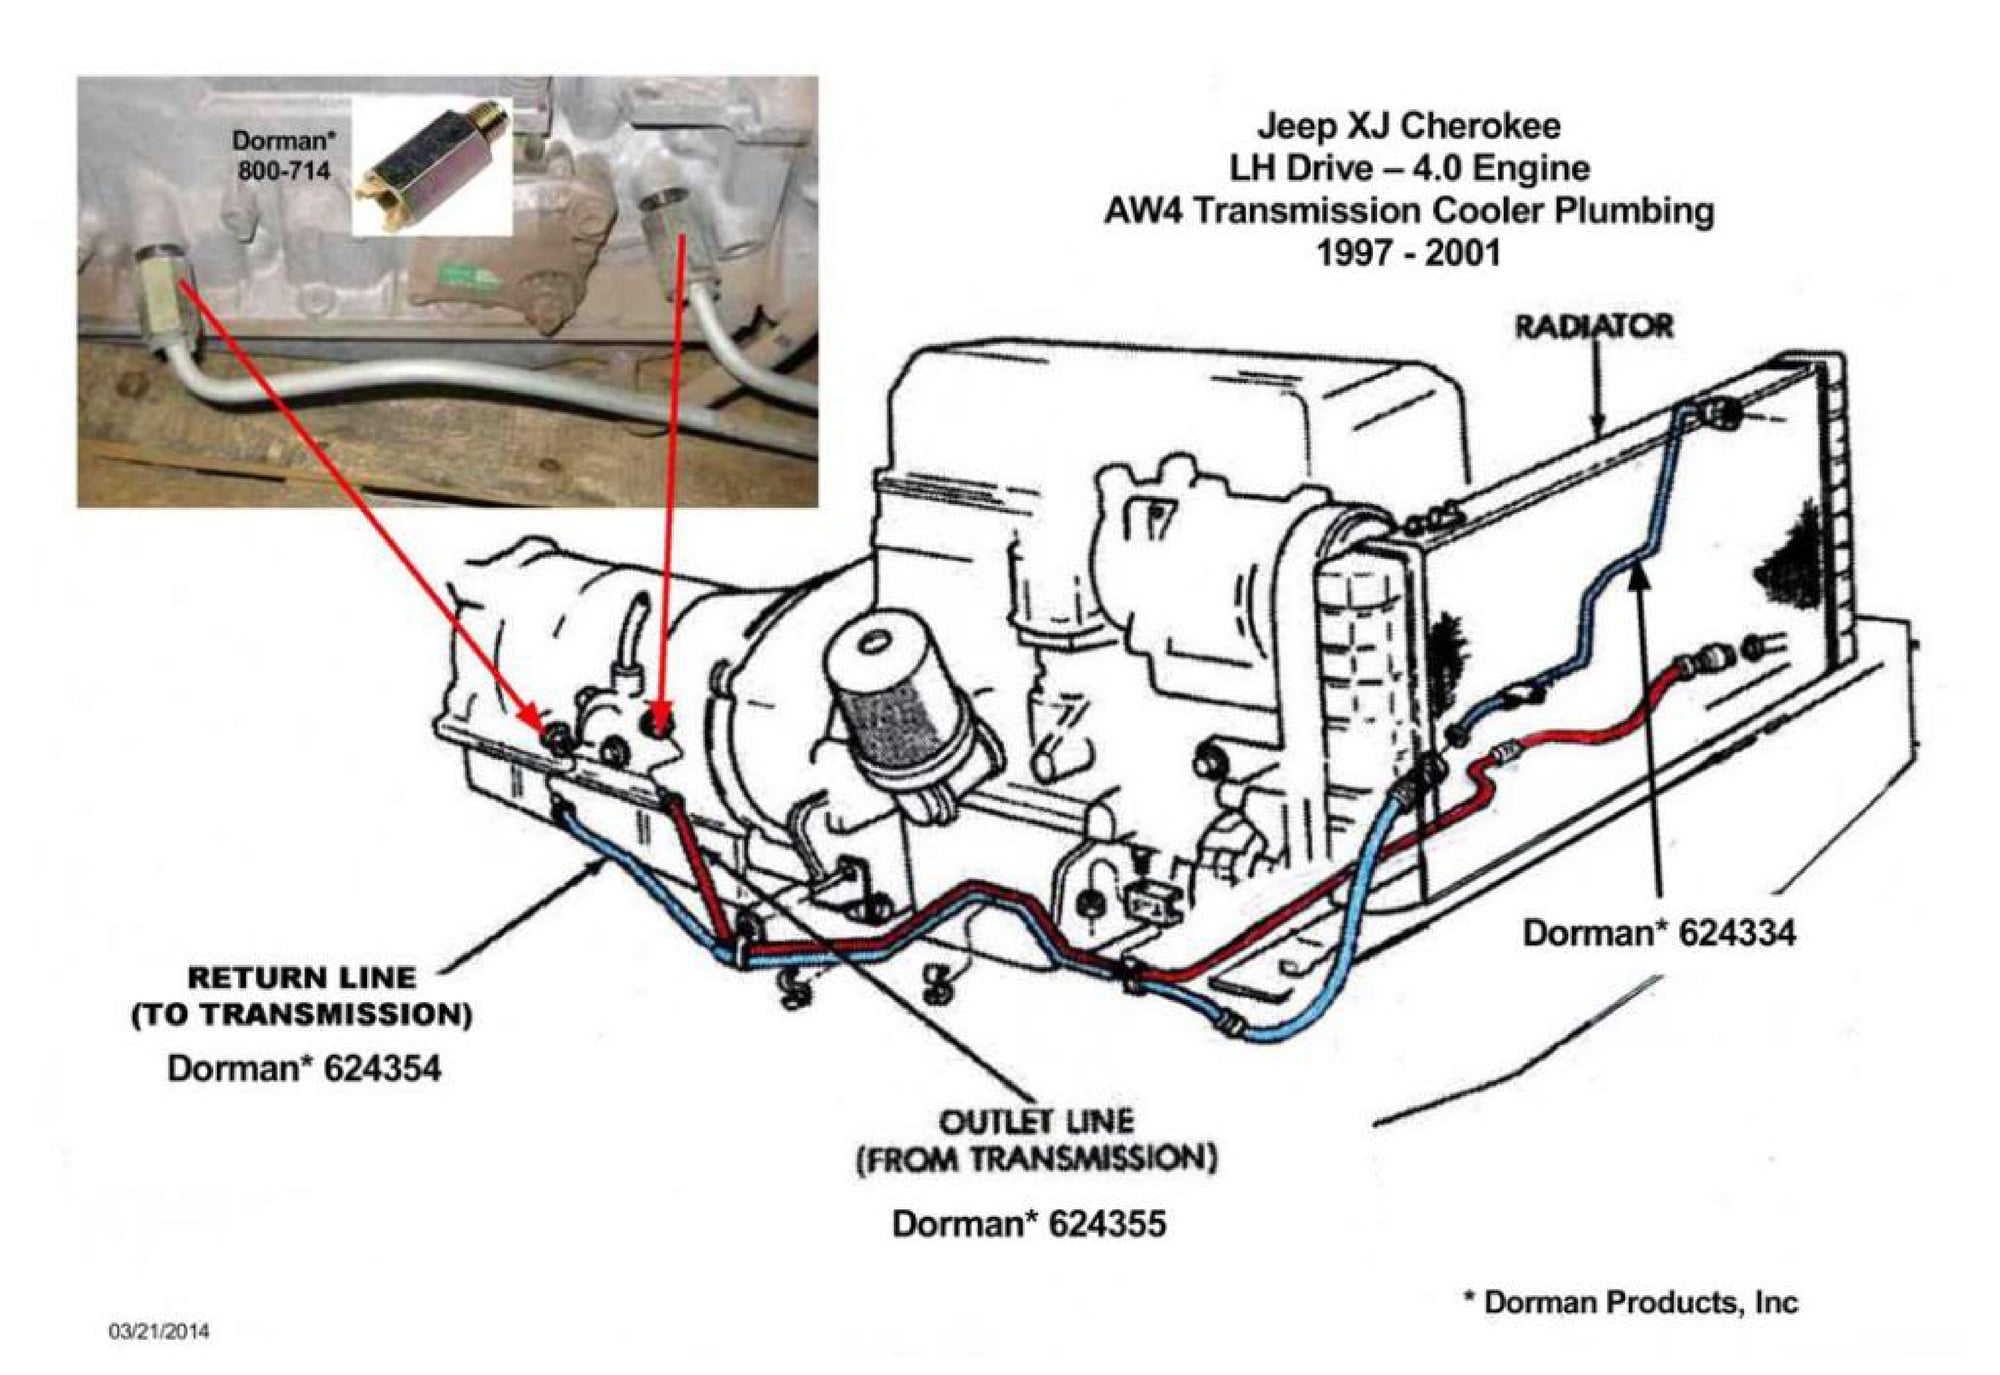 Lower transmission cooler line replacement. Which part? - Jeep Cherokee  Forum